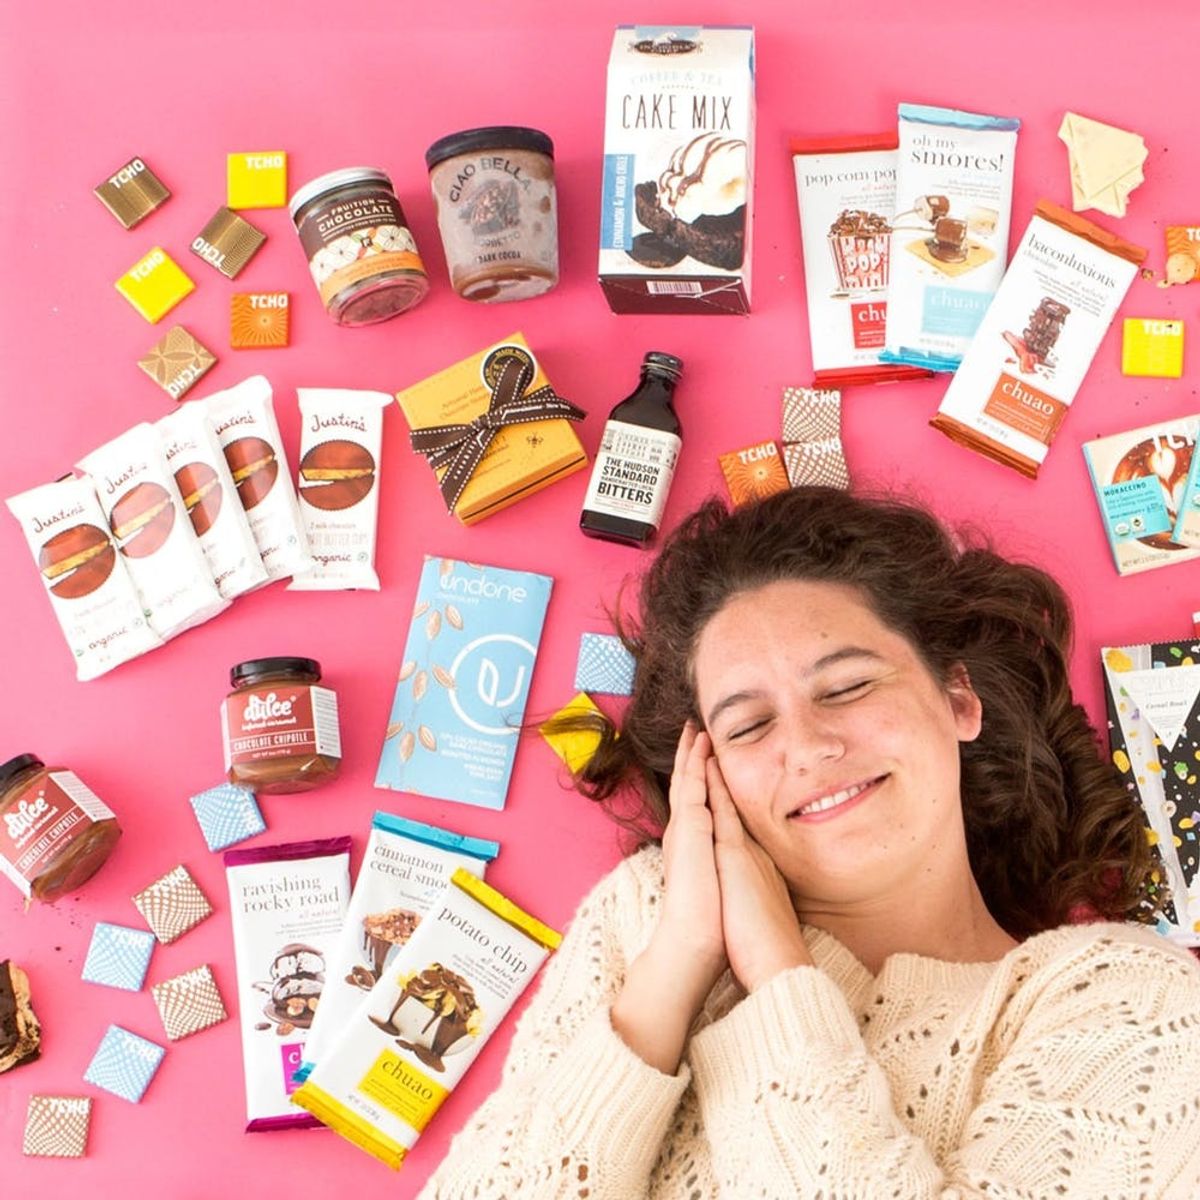 I Went on a Chocolate Cleanse Diet for a Week and Here’s What Happened